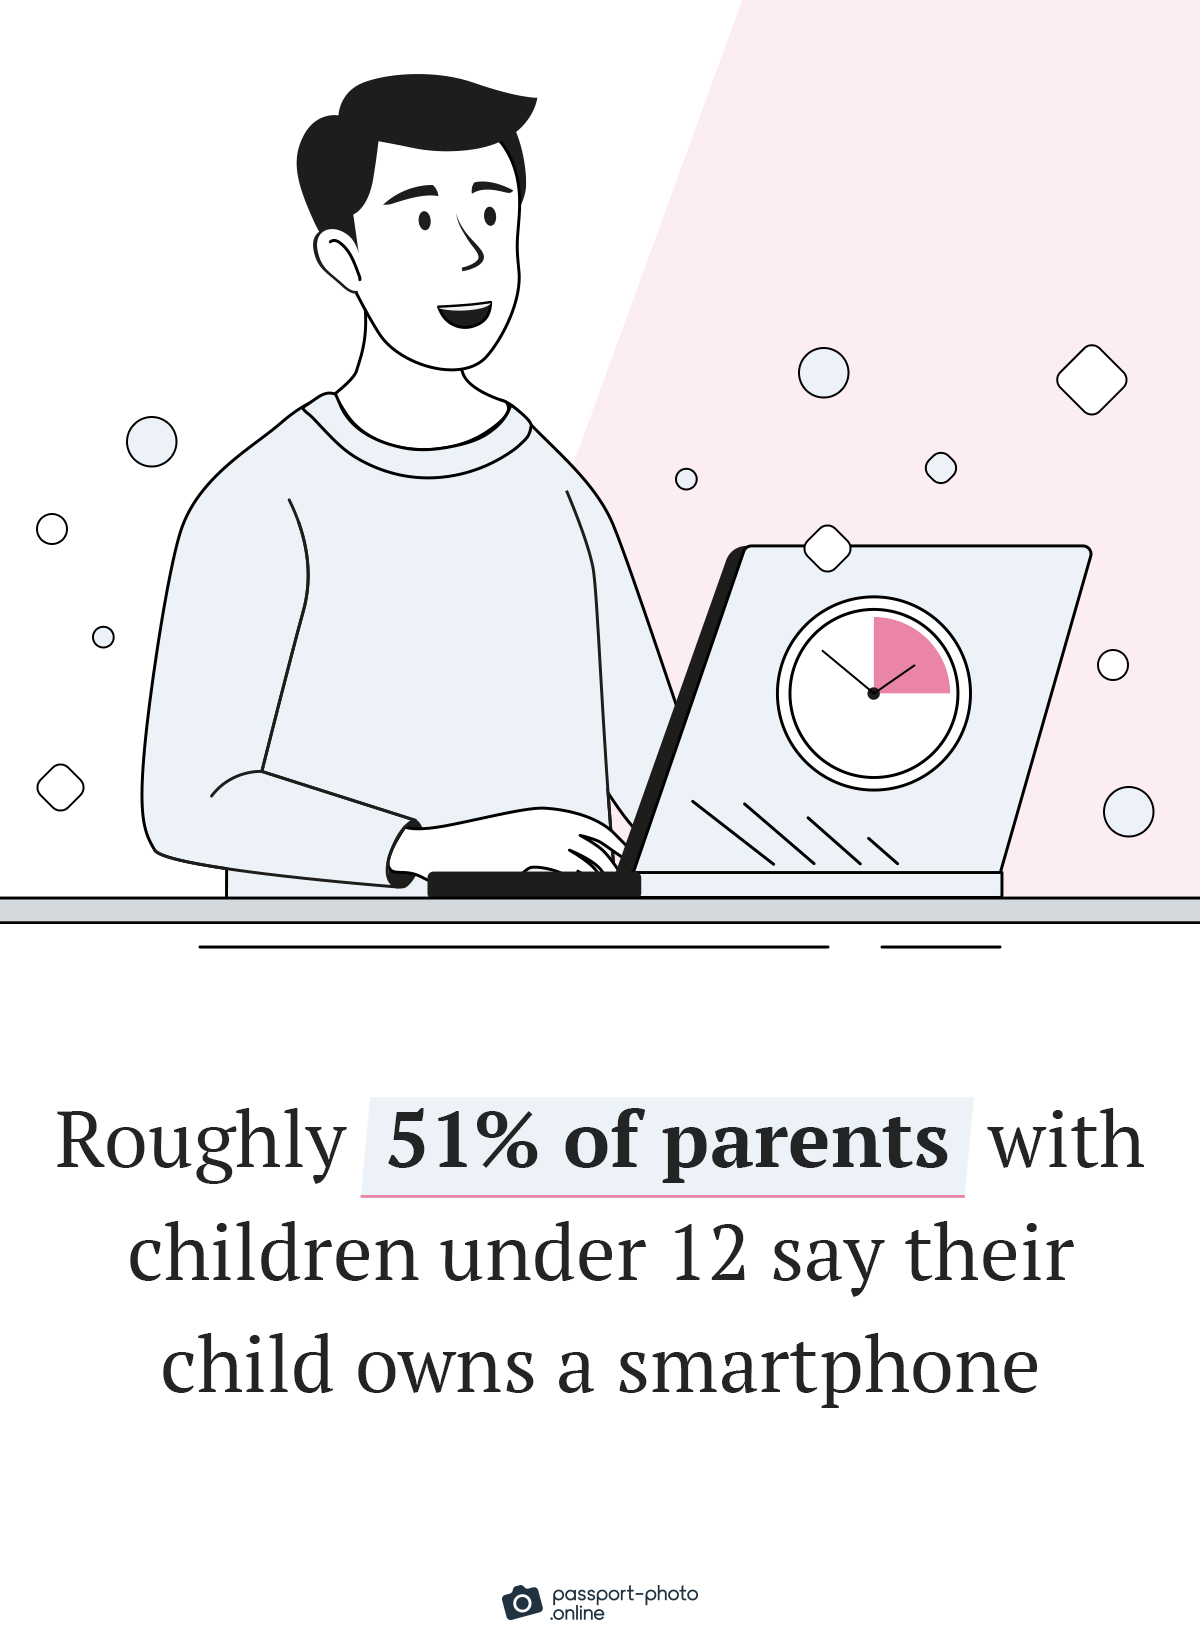 51% of parents with children under 12 say their child owns a smartphone